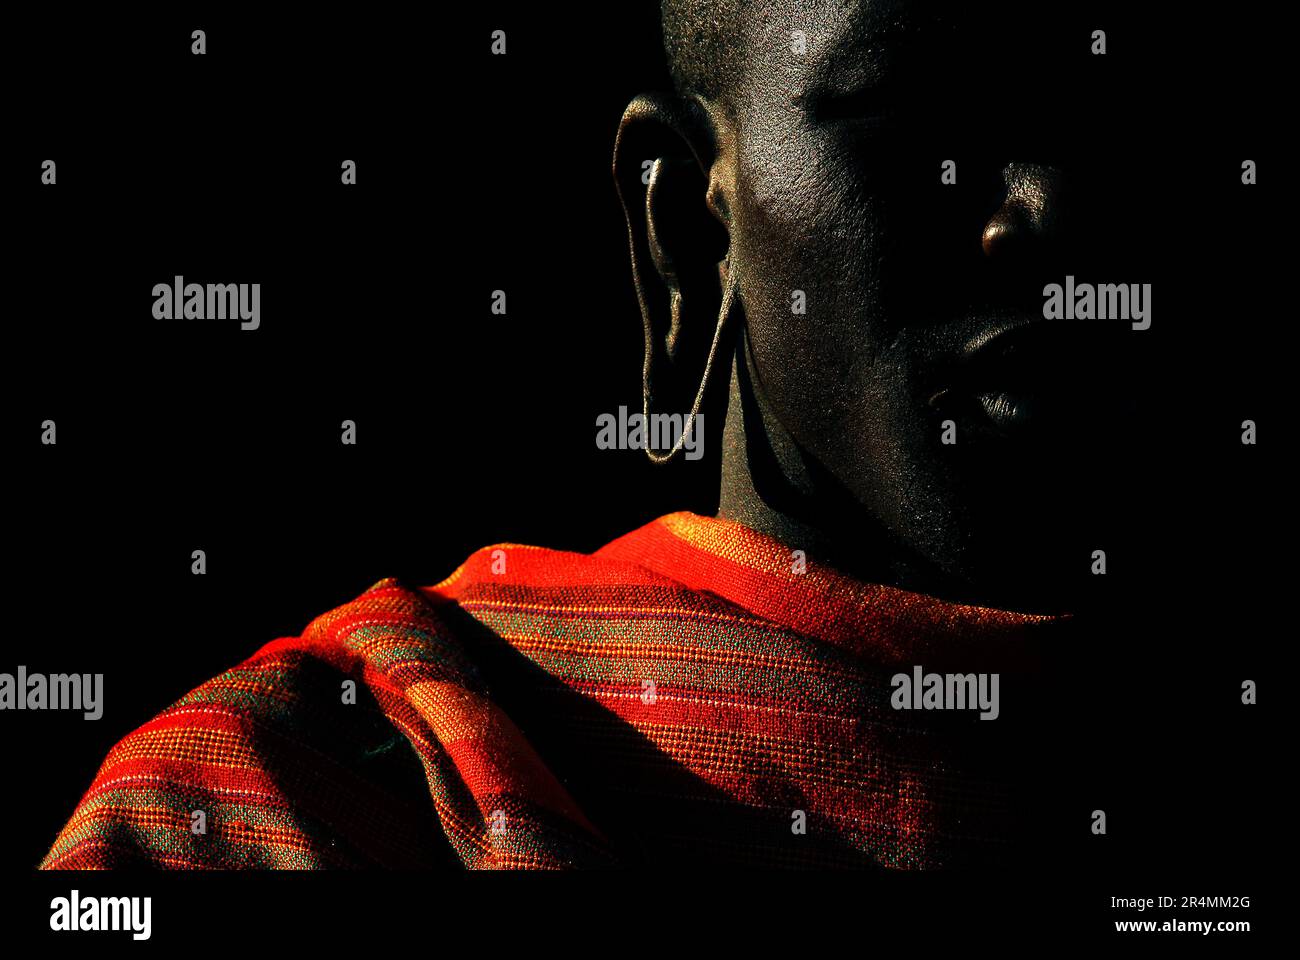 A member of the Masai tribe displays his stretched earlobes in Masai-Mara National Reserve, Kenya. Stock Photo